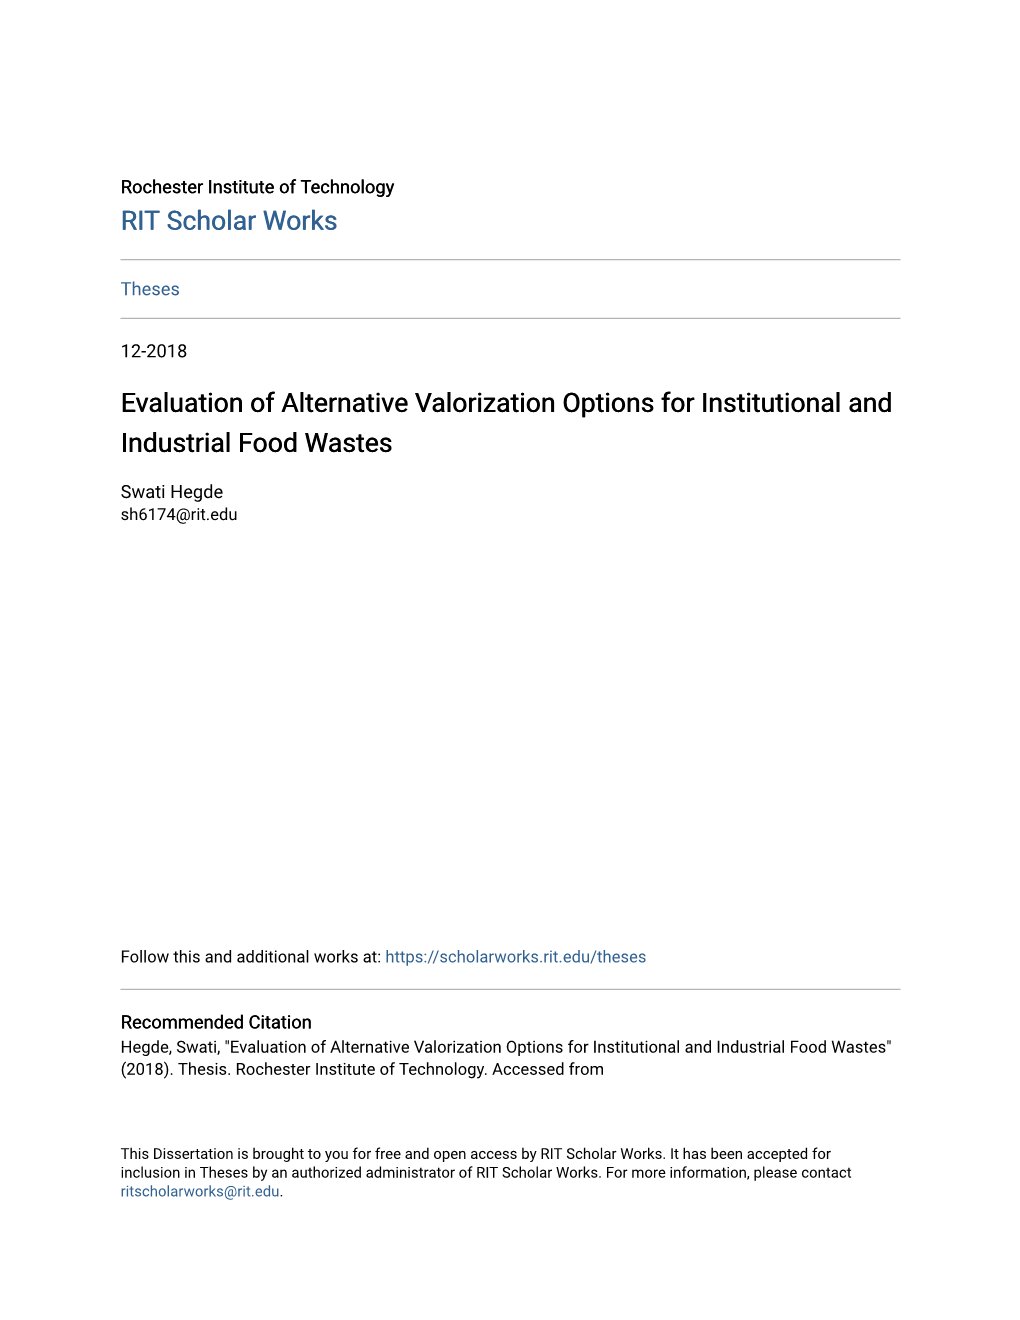 Evaluation of Alternative Valorization Options for Institutional and Industrial Food Wastes